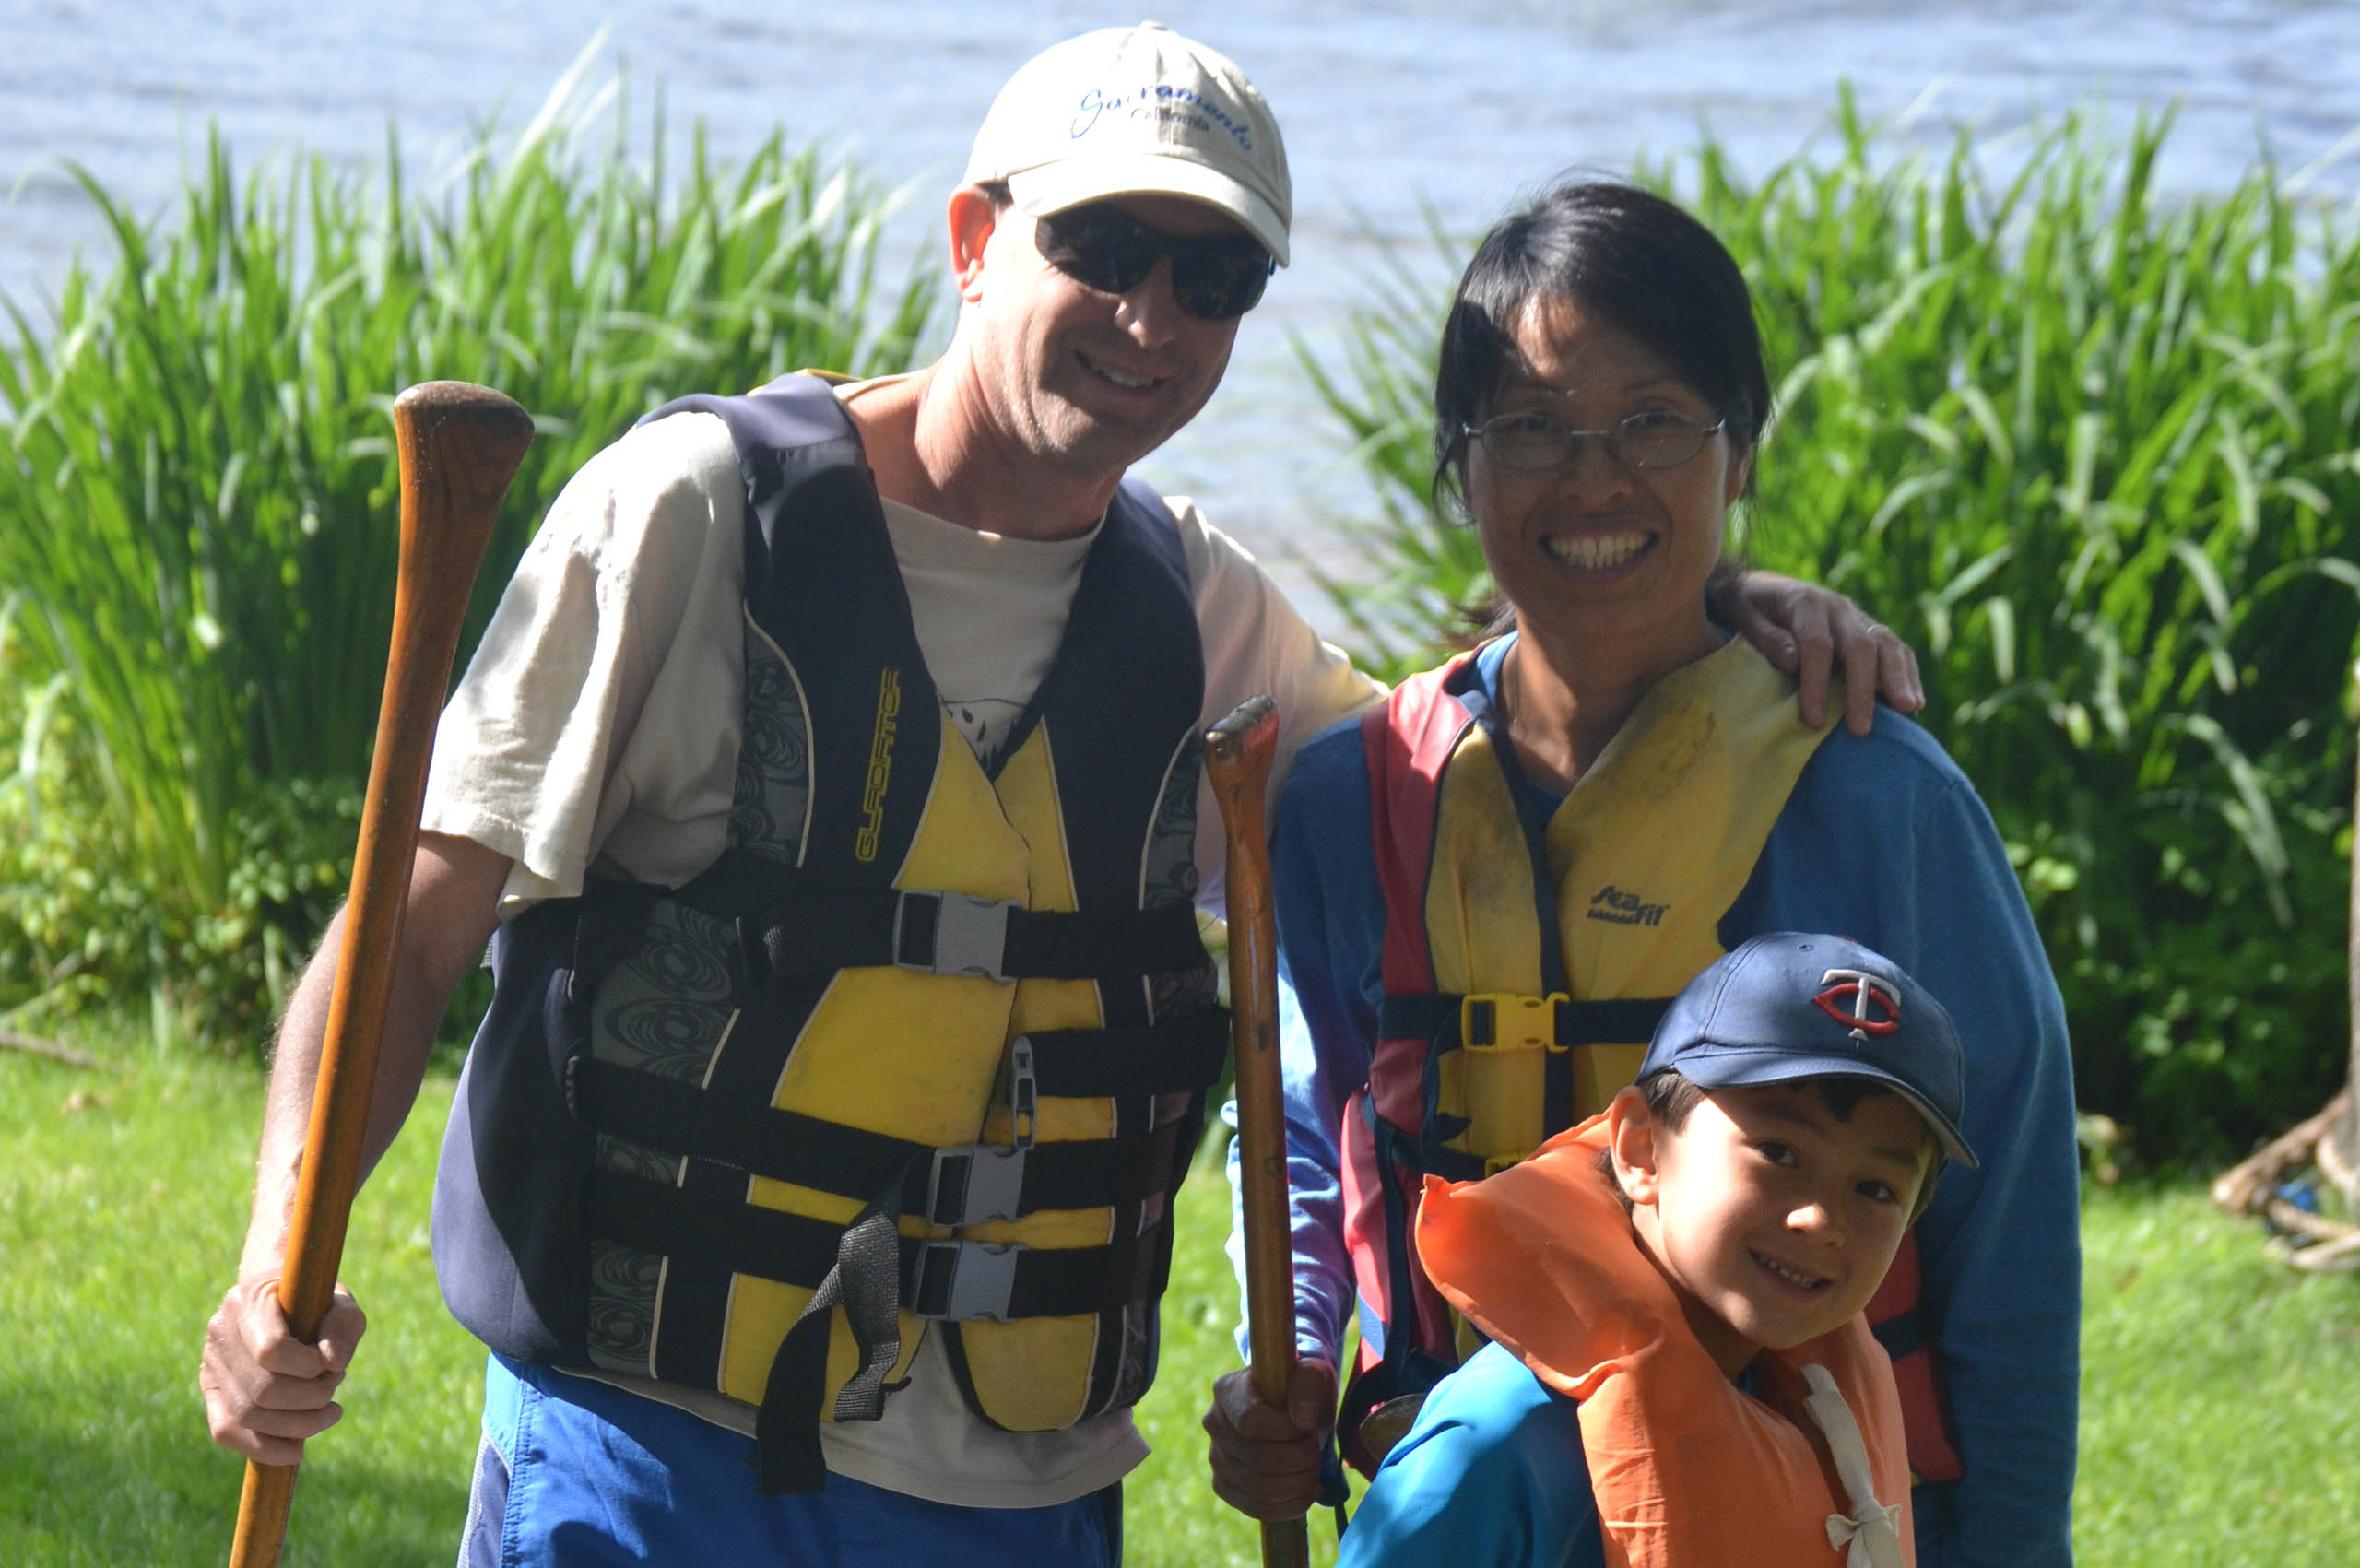 A family of three wearing life jackets.